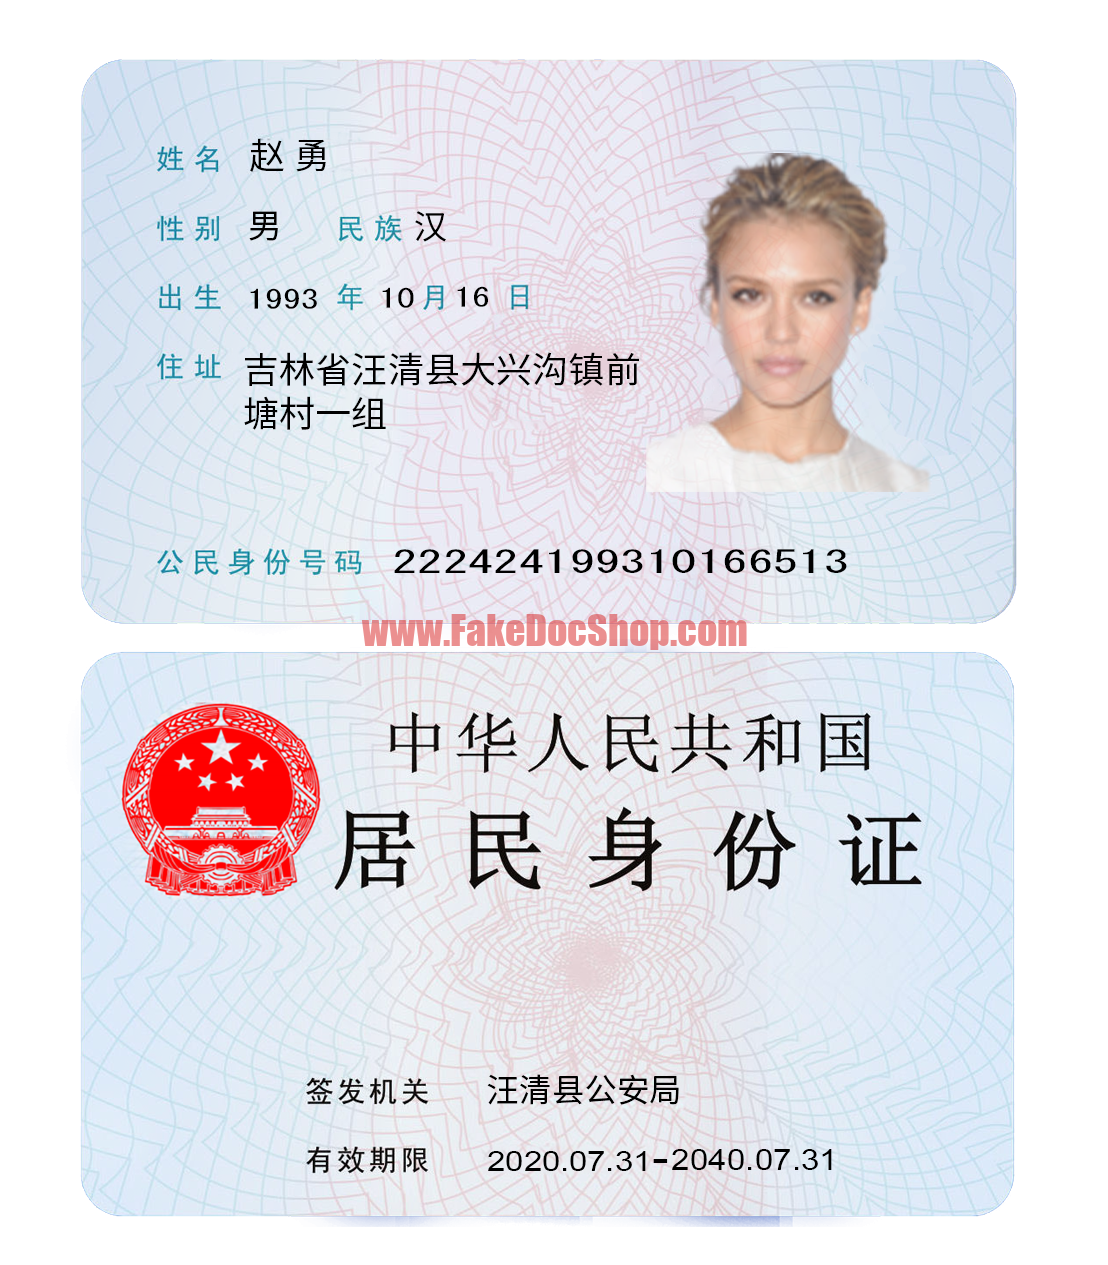 China ID Card PSD Template Id Card Template, Driving License, Photo